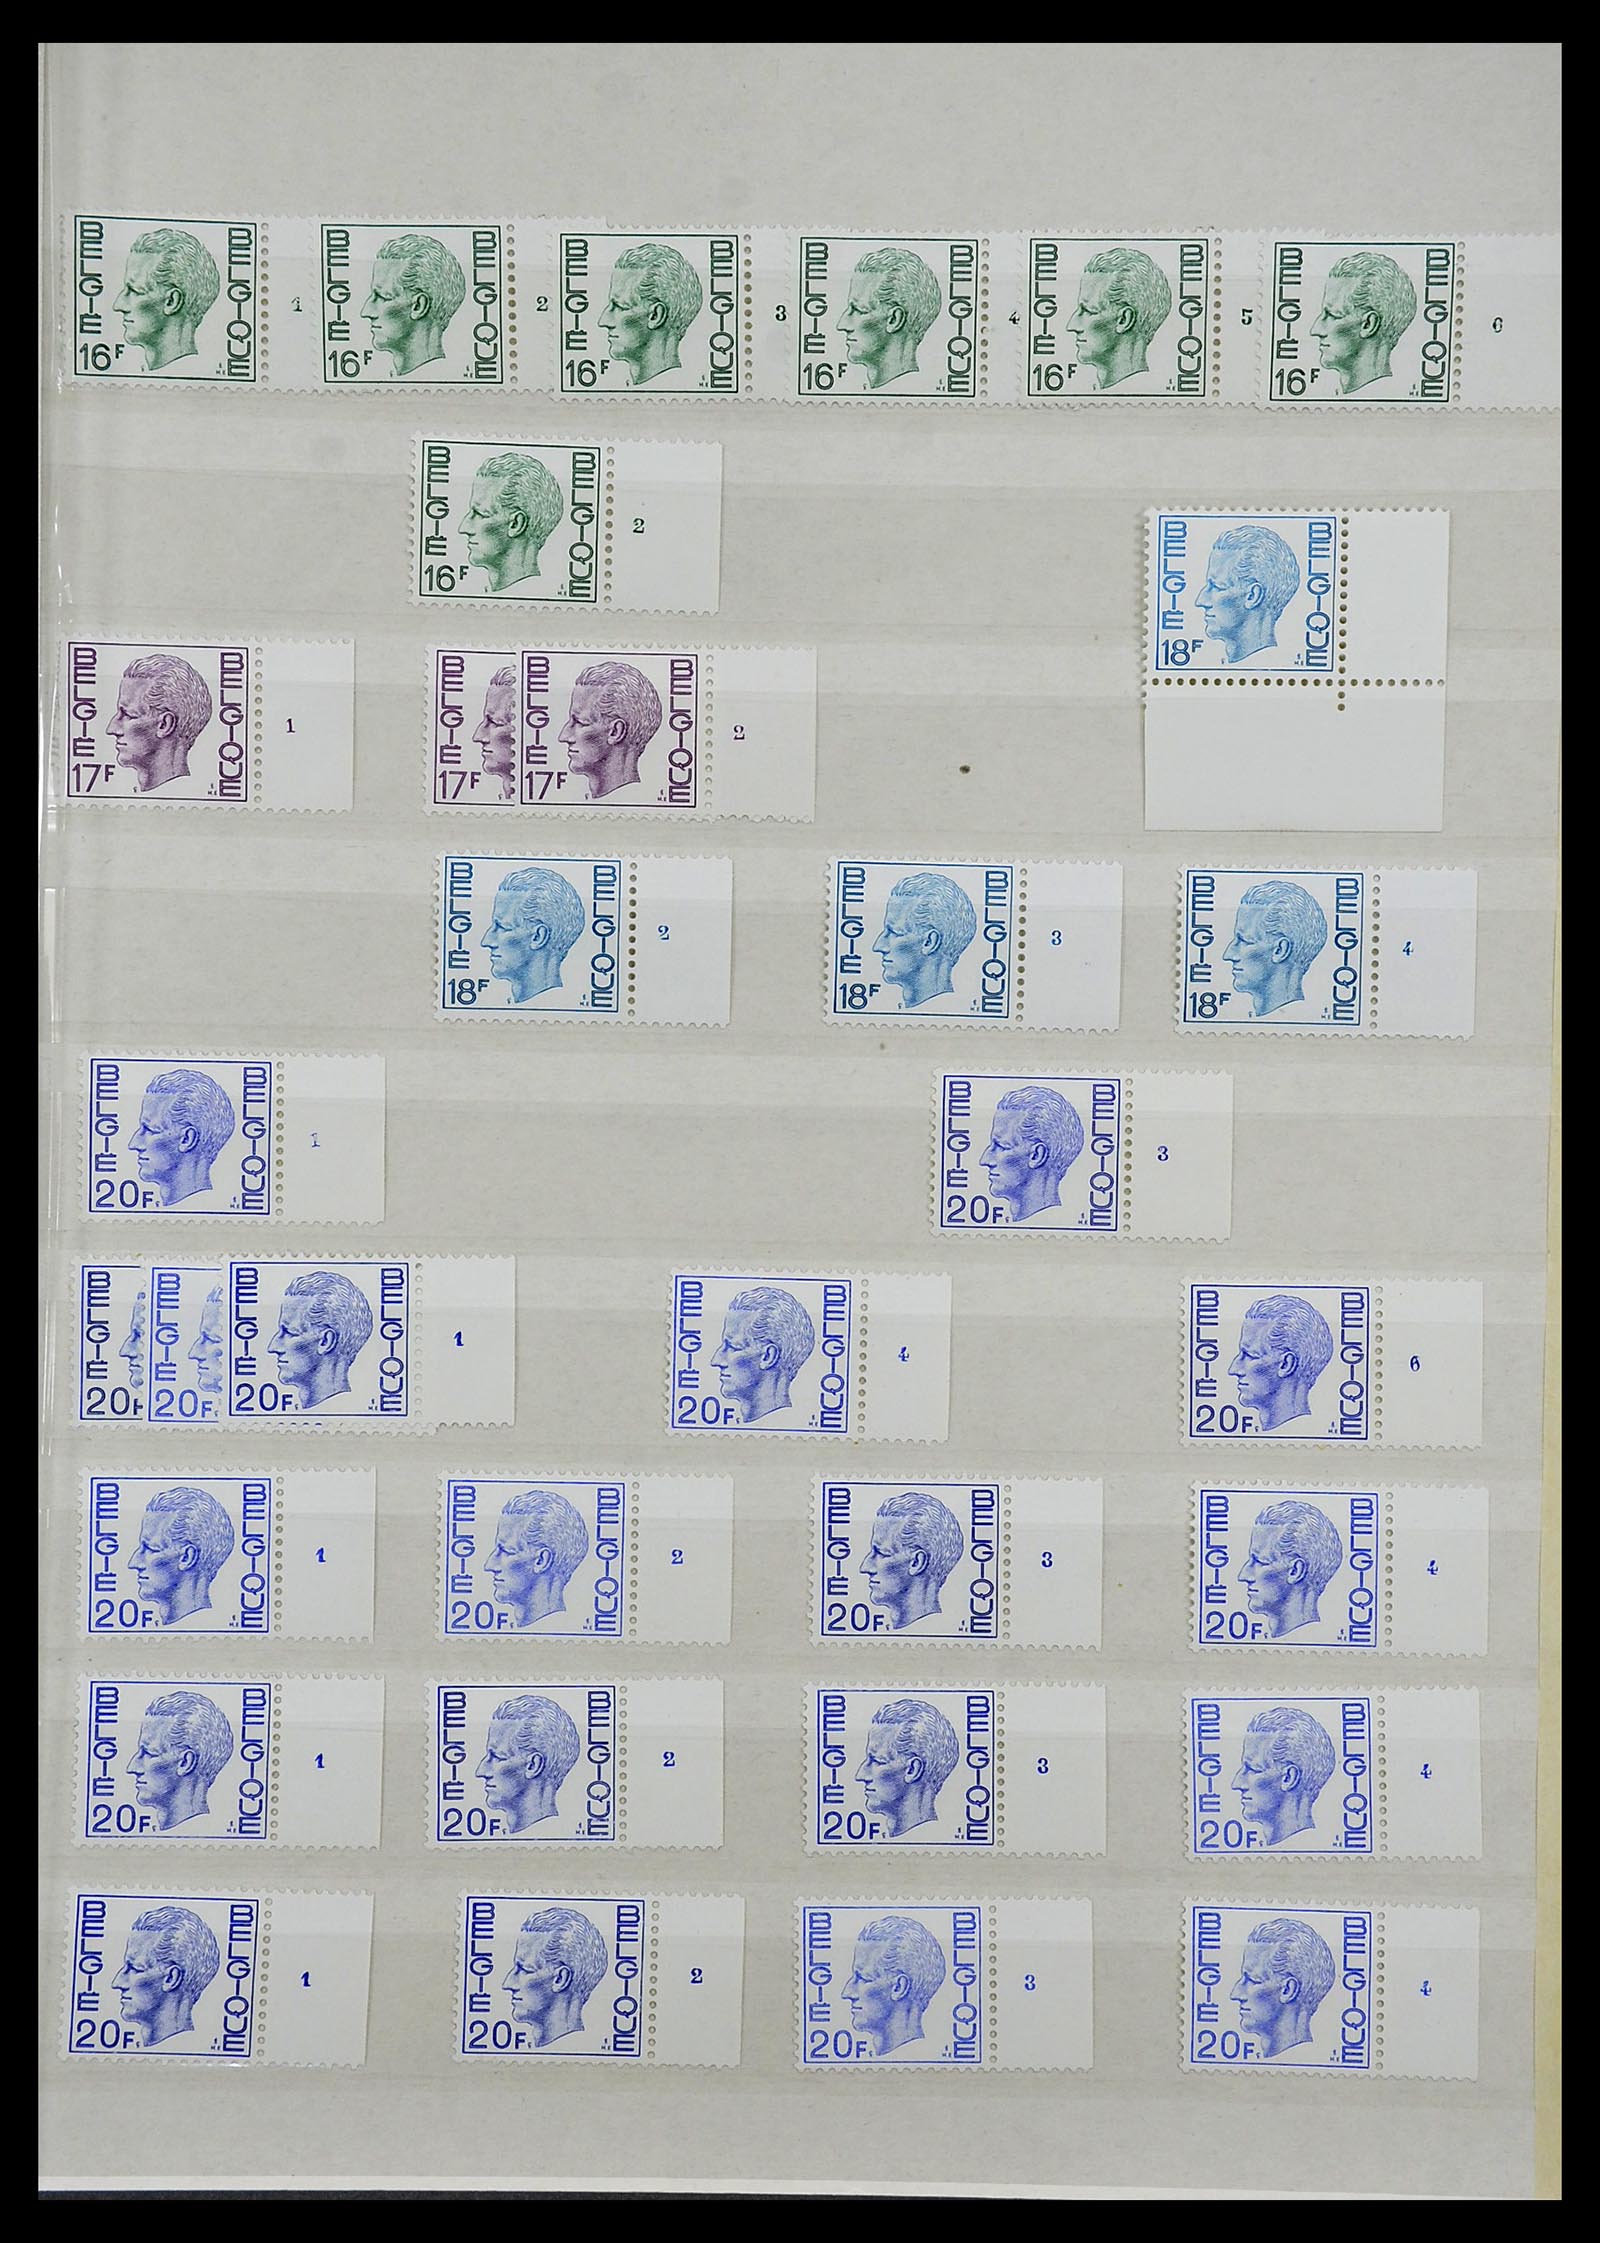 34524 087 - Stamp Collection 34524 Belgium plate and etching numbers 1963-1990.